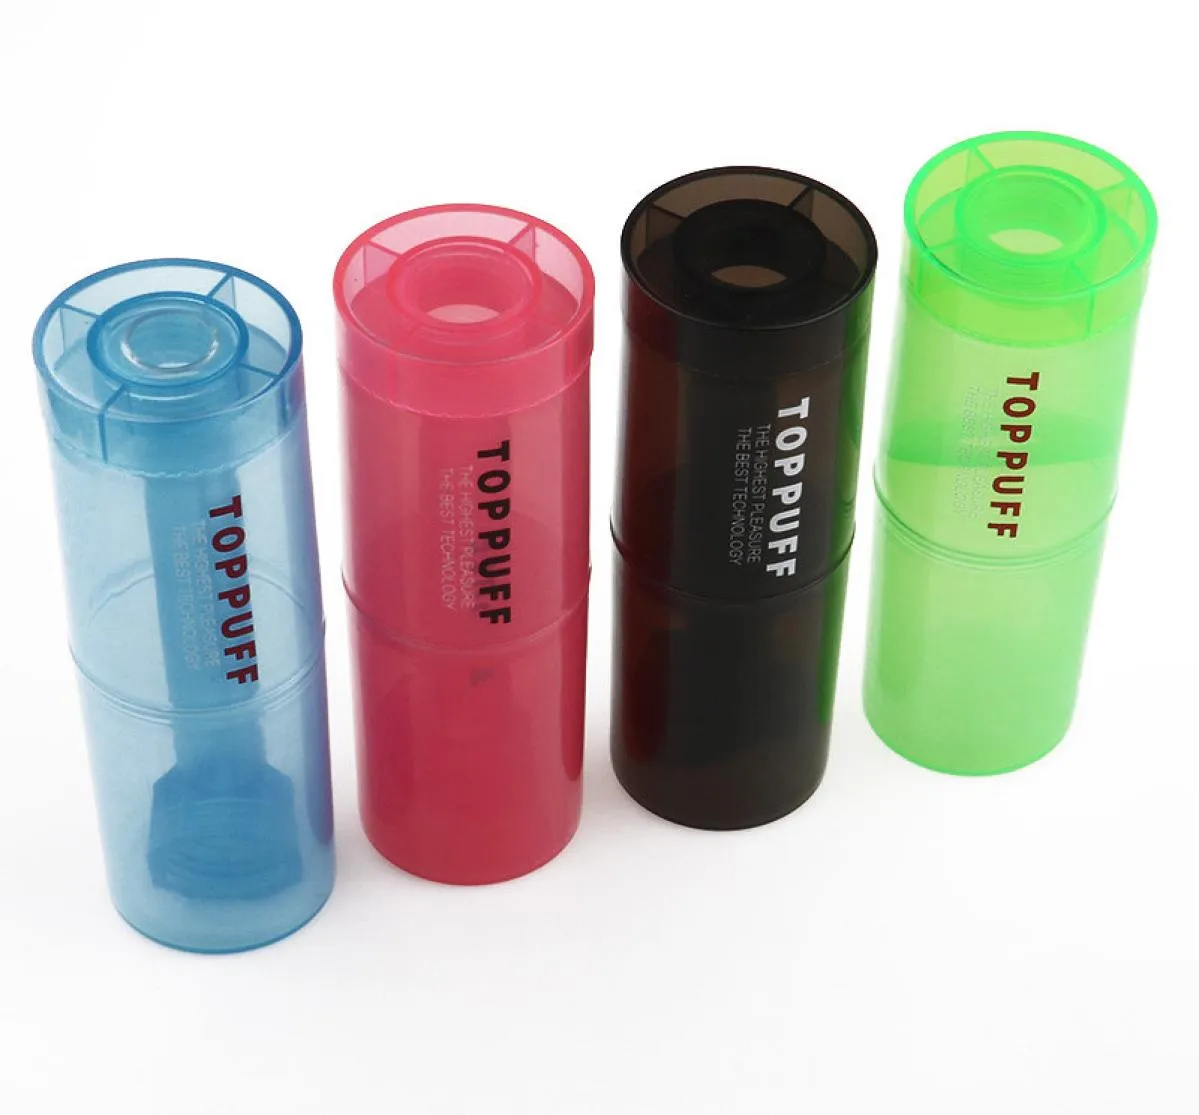 Whole Travel TOPPUFF Tobacco Bongs Smoking Pipe Tube For Trip Toppuff water Pipe Plastic Material Good Quality6794066